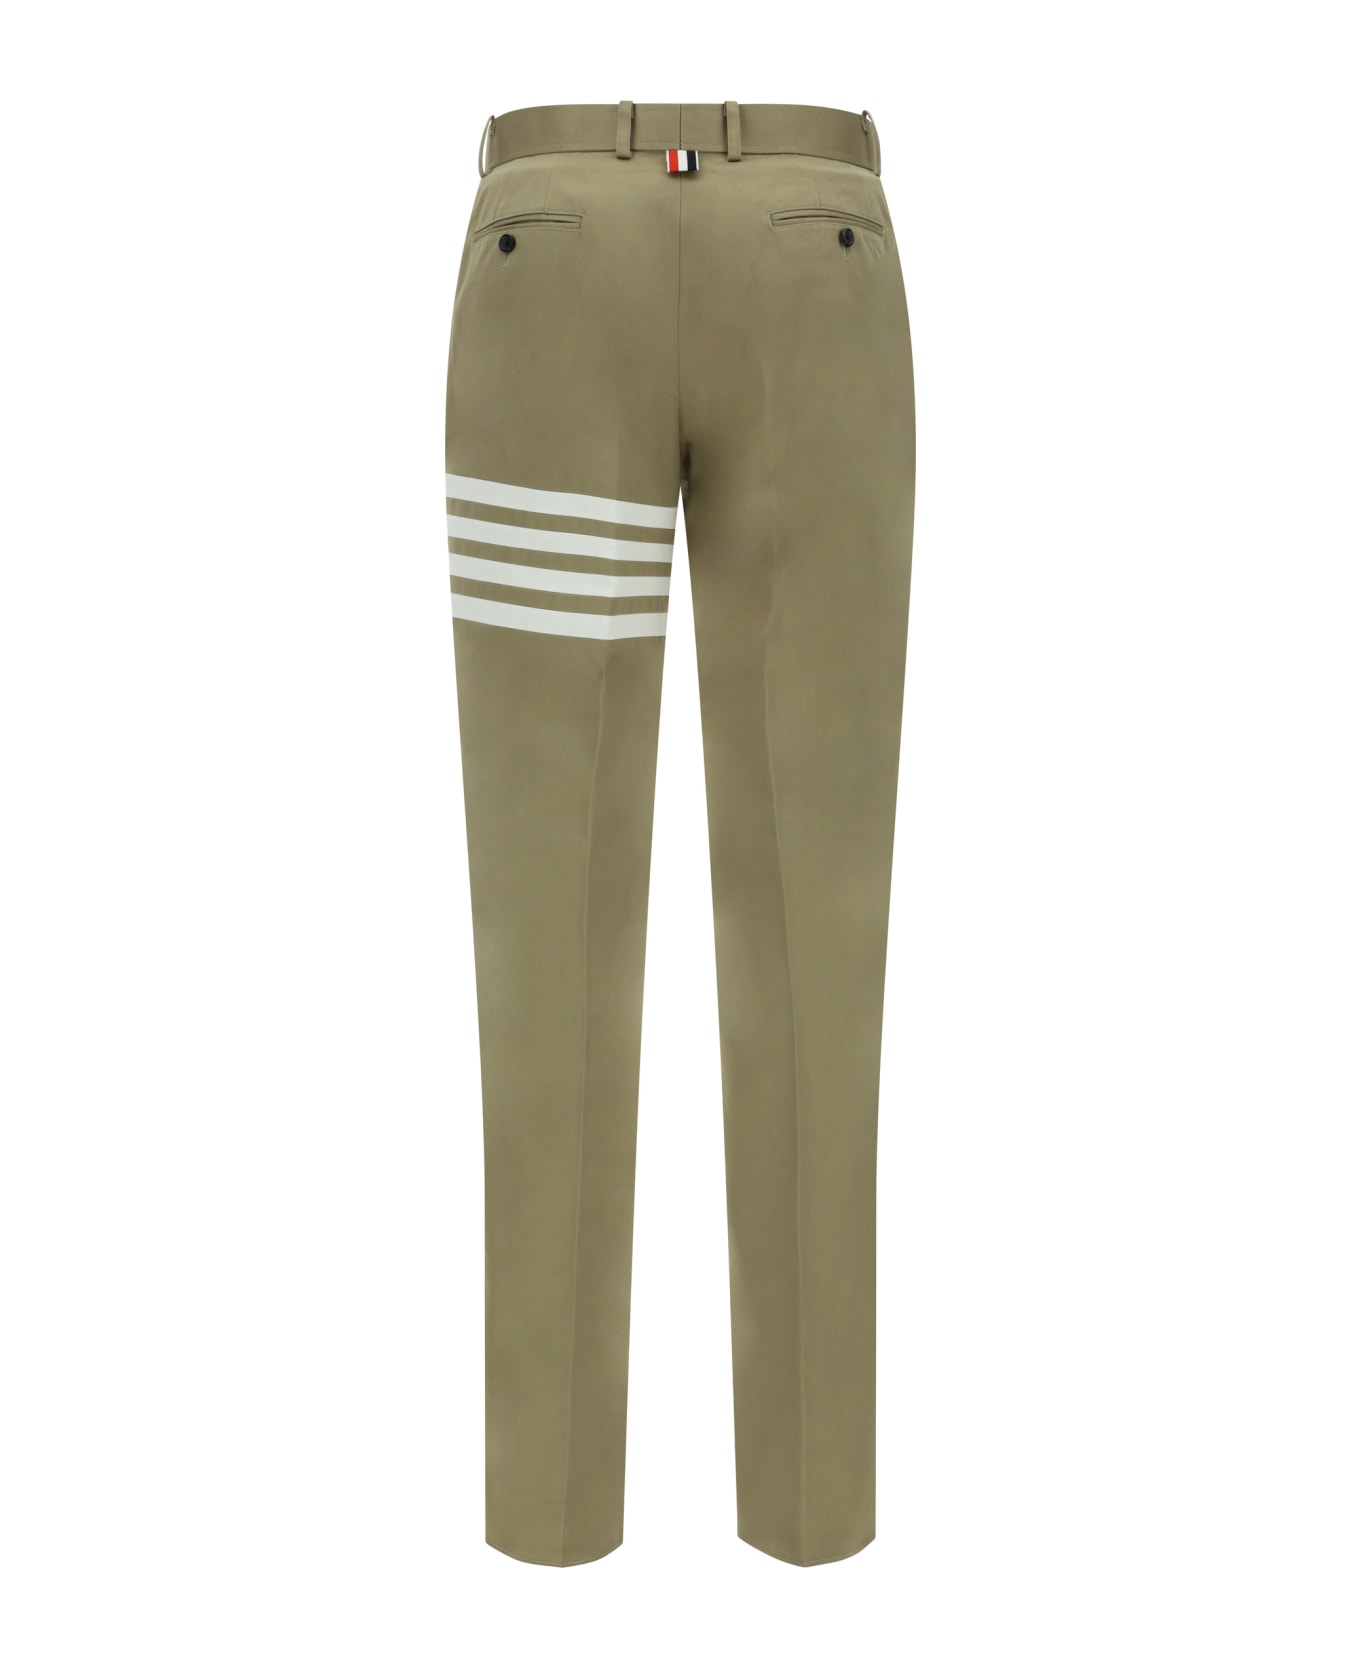 Thom Browne Chino Trousers - Camel